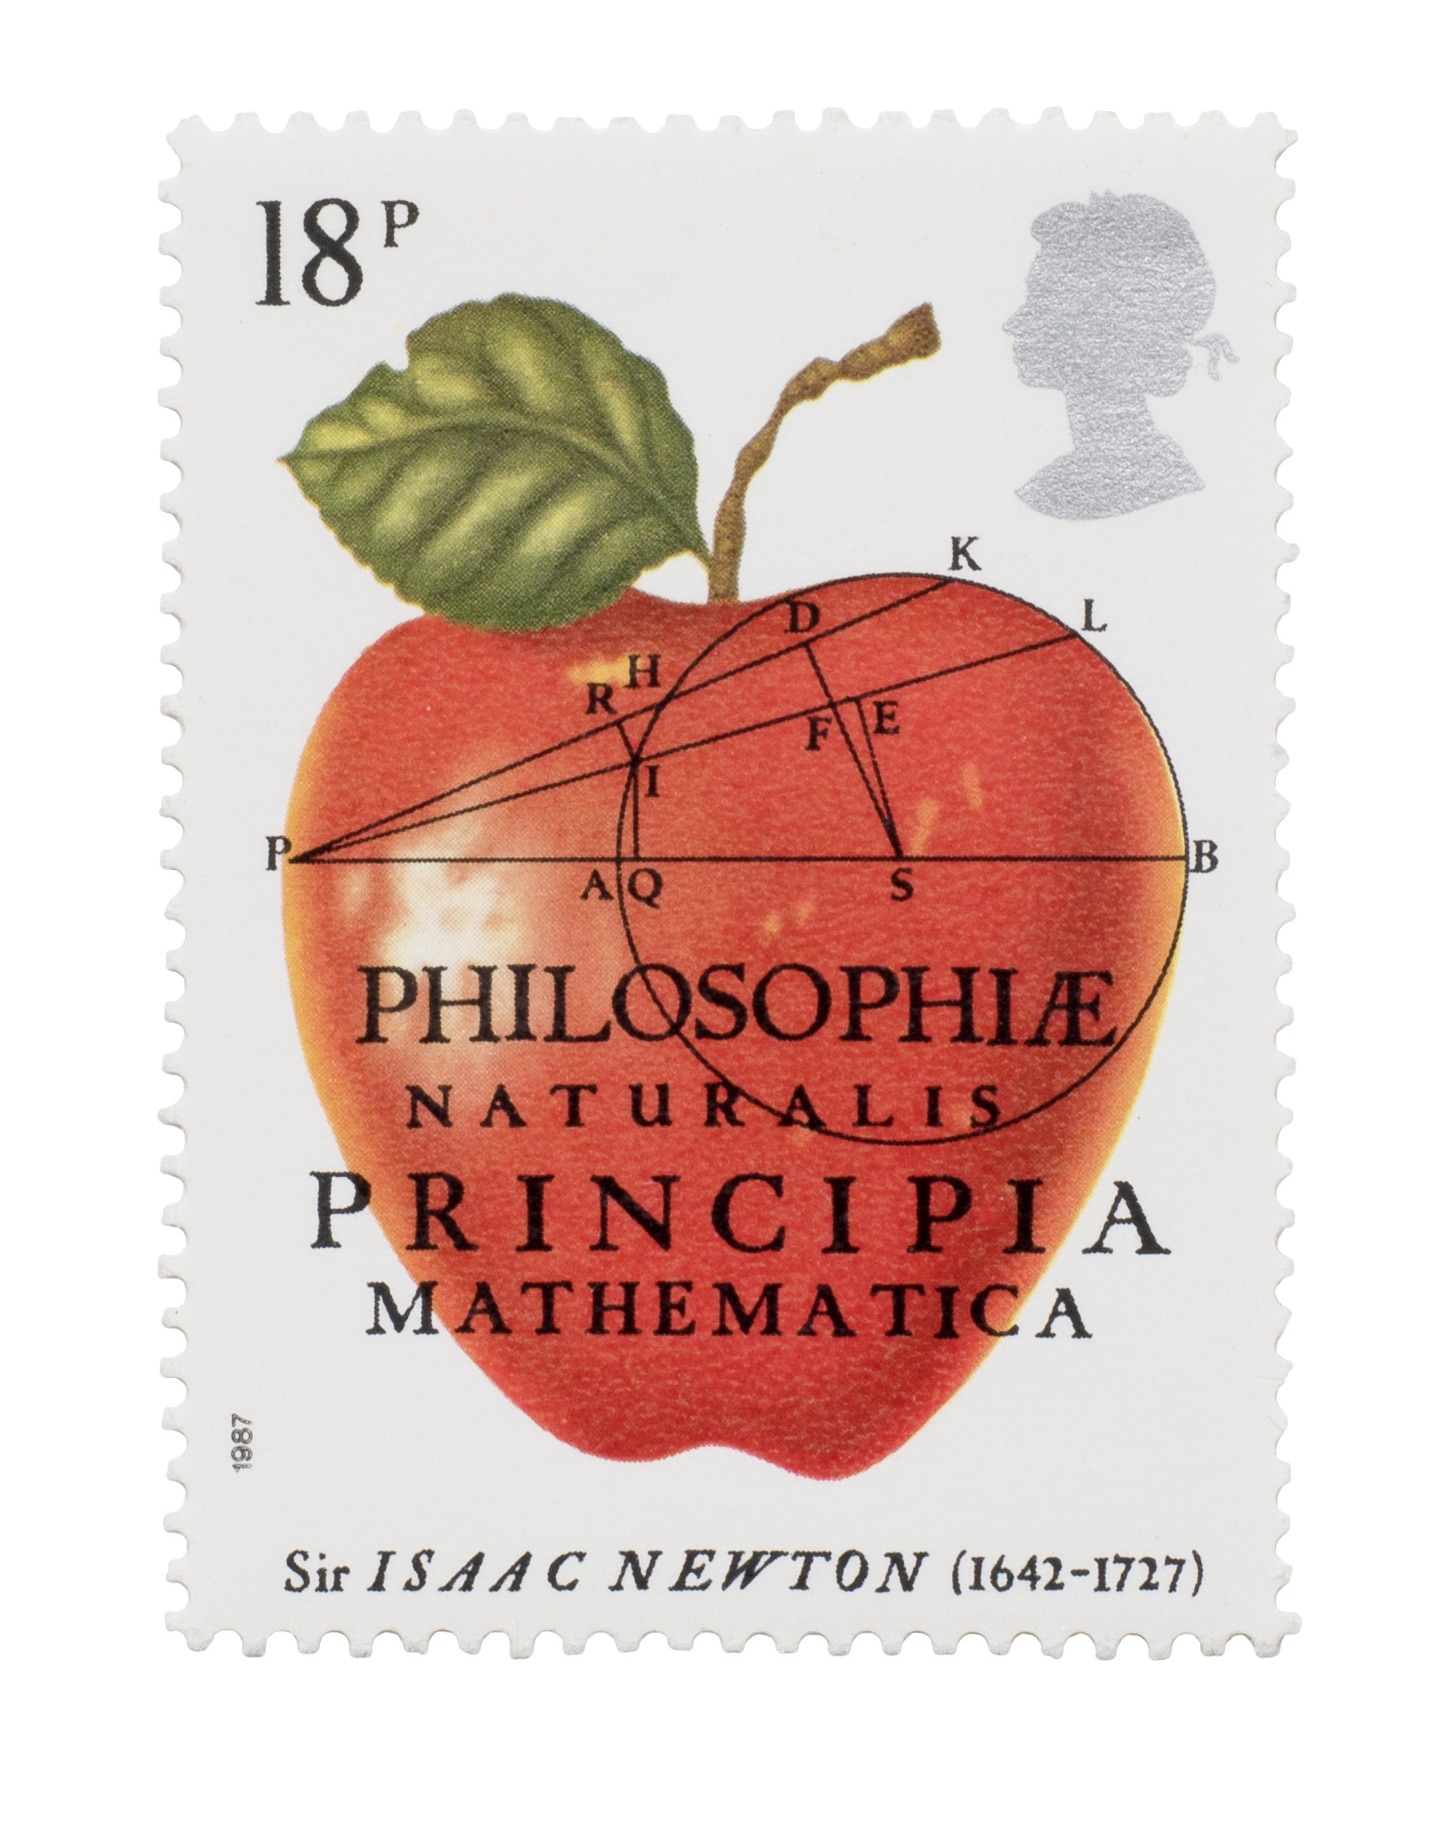 The core of truth behind Sir Isaac Newton's apple